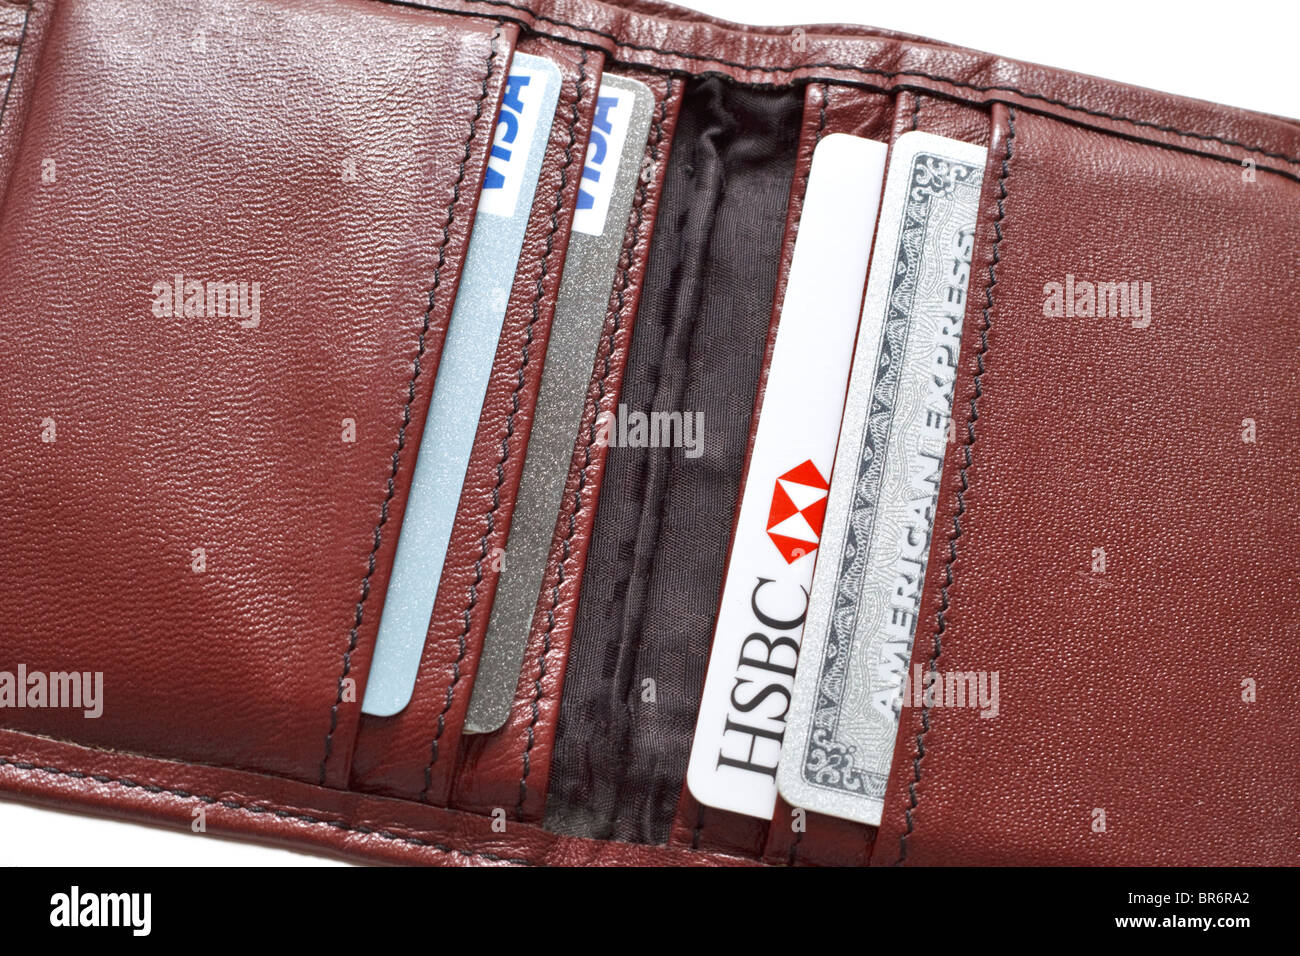 Wallet with debit and credit cards Stock Photo